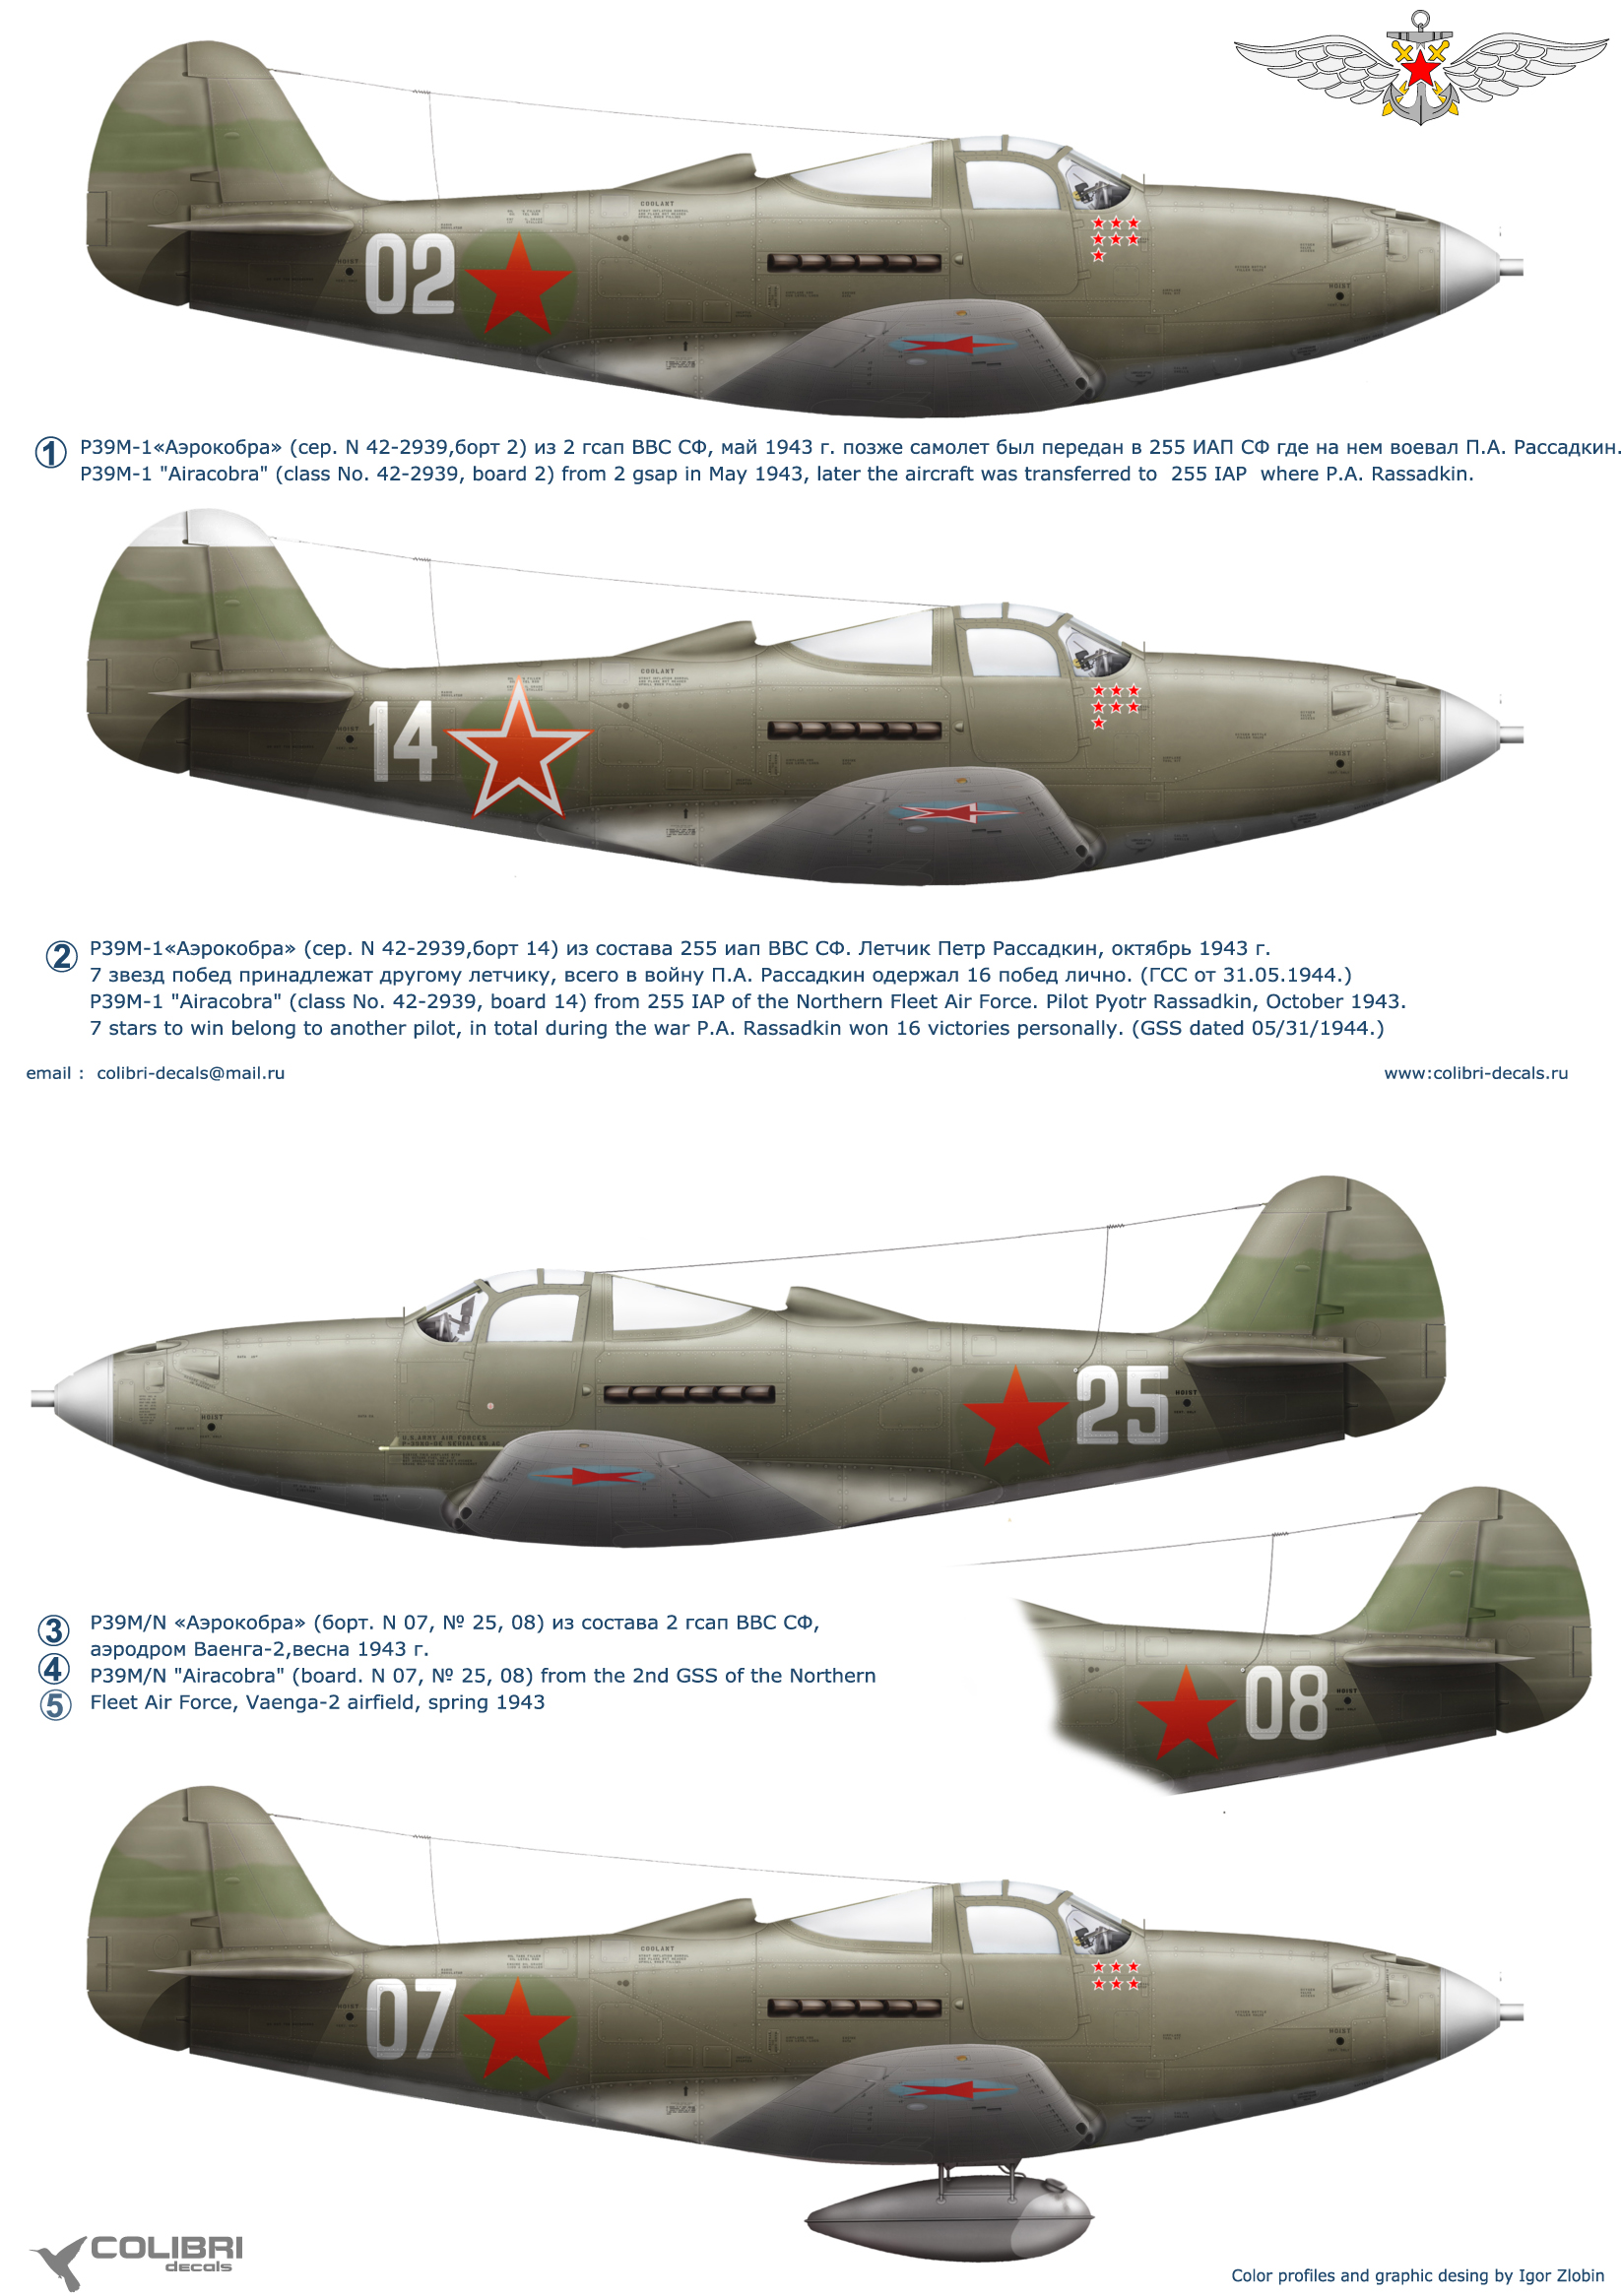 Decal 1/72 Р-39 in the Fleet Air Force (Colibri Decals)